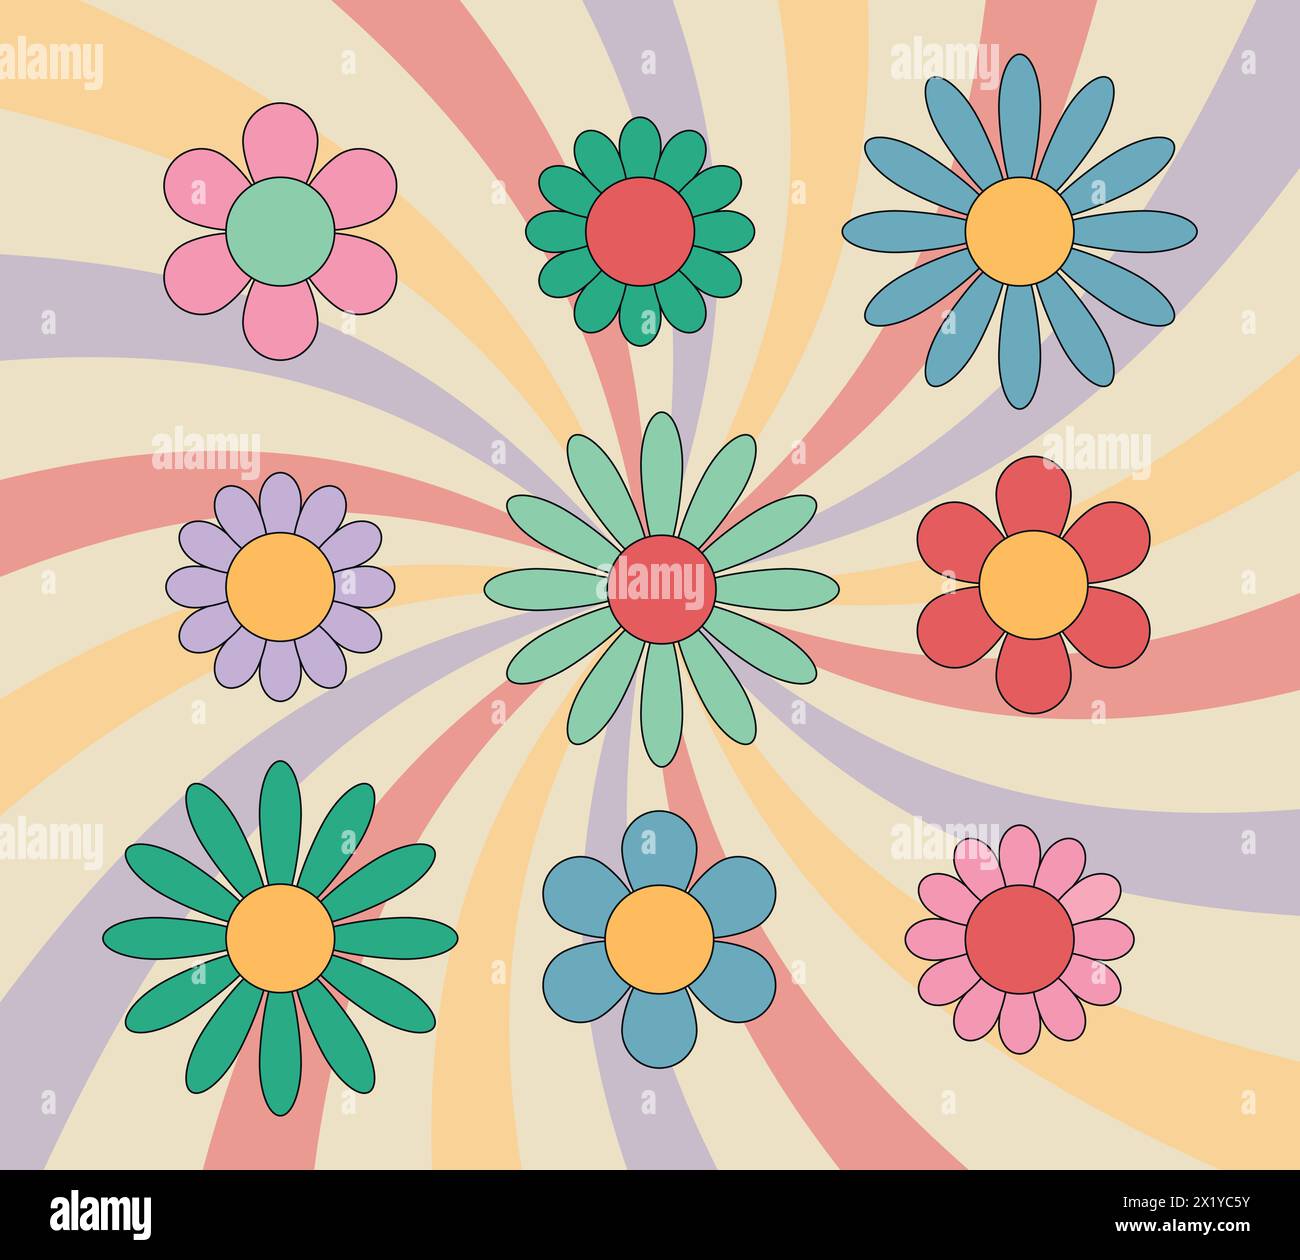 Groovy daisy flowers colorful set. Hippie retro style. Flower icons. Vector illustration Stock Vector